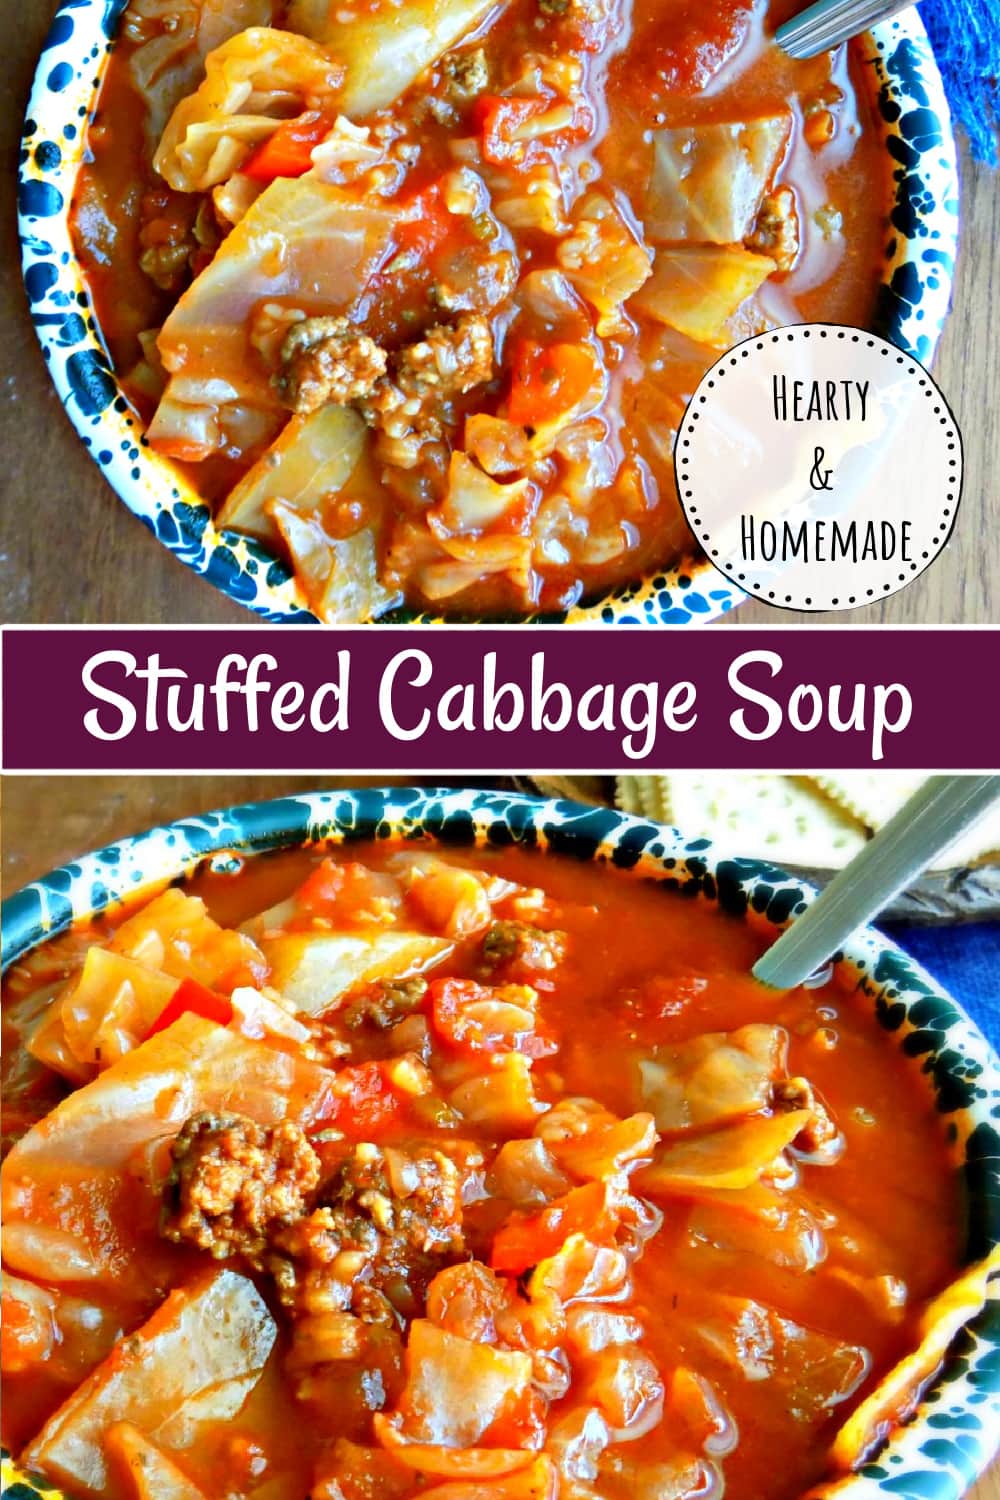 Cabbage Roll Soup